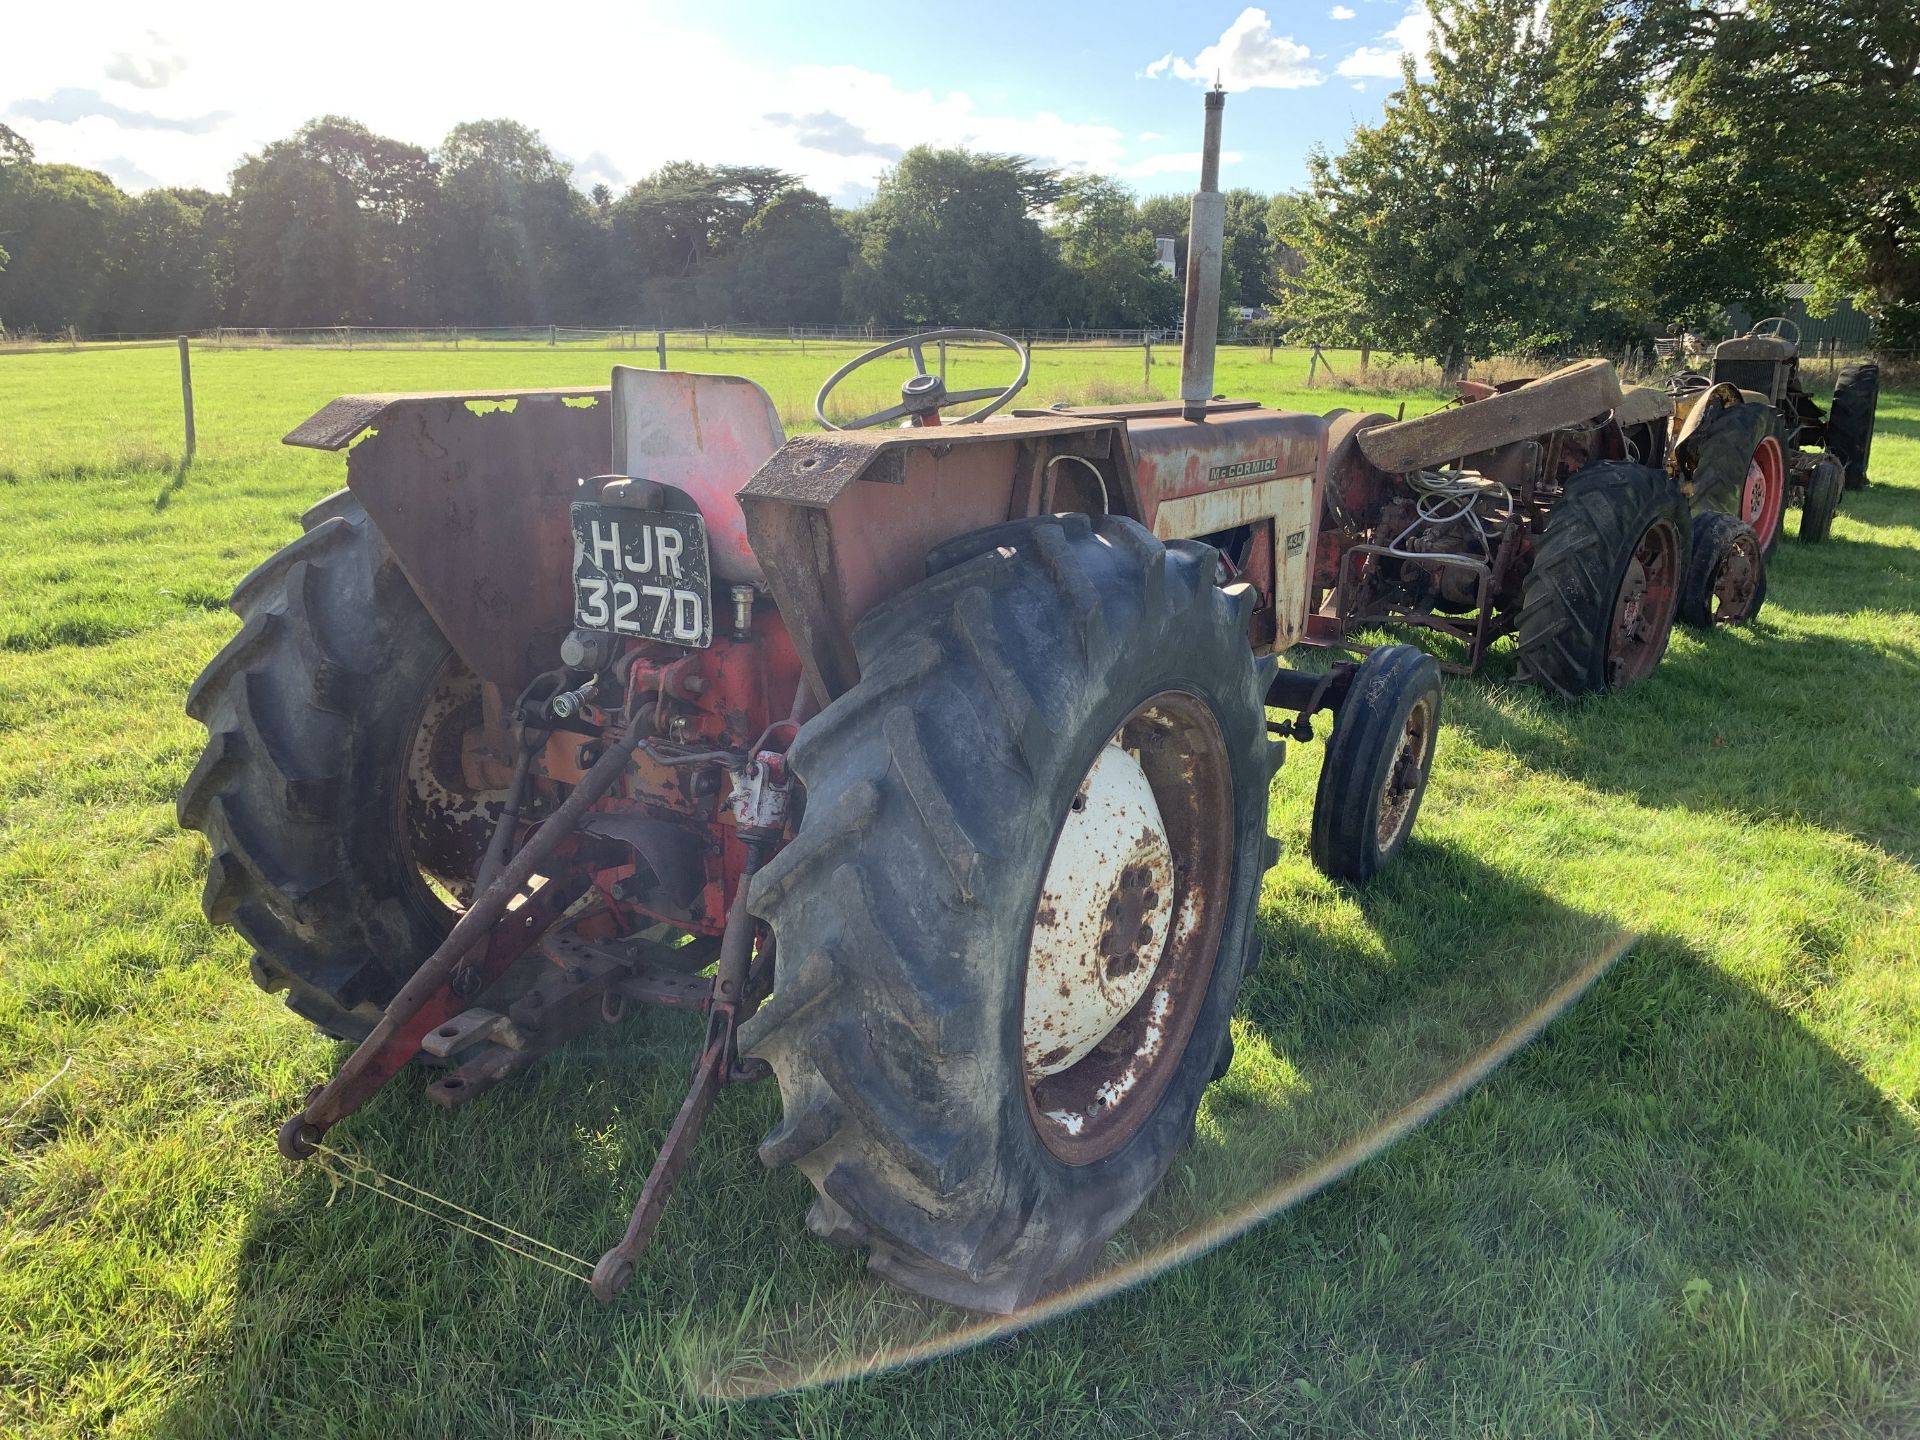 1966 McCormick 434 tractor, HJR 327D, 5819hrs indicated, diesel - Image 6 of 6